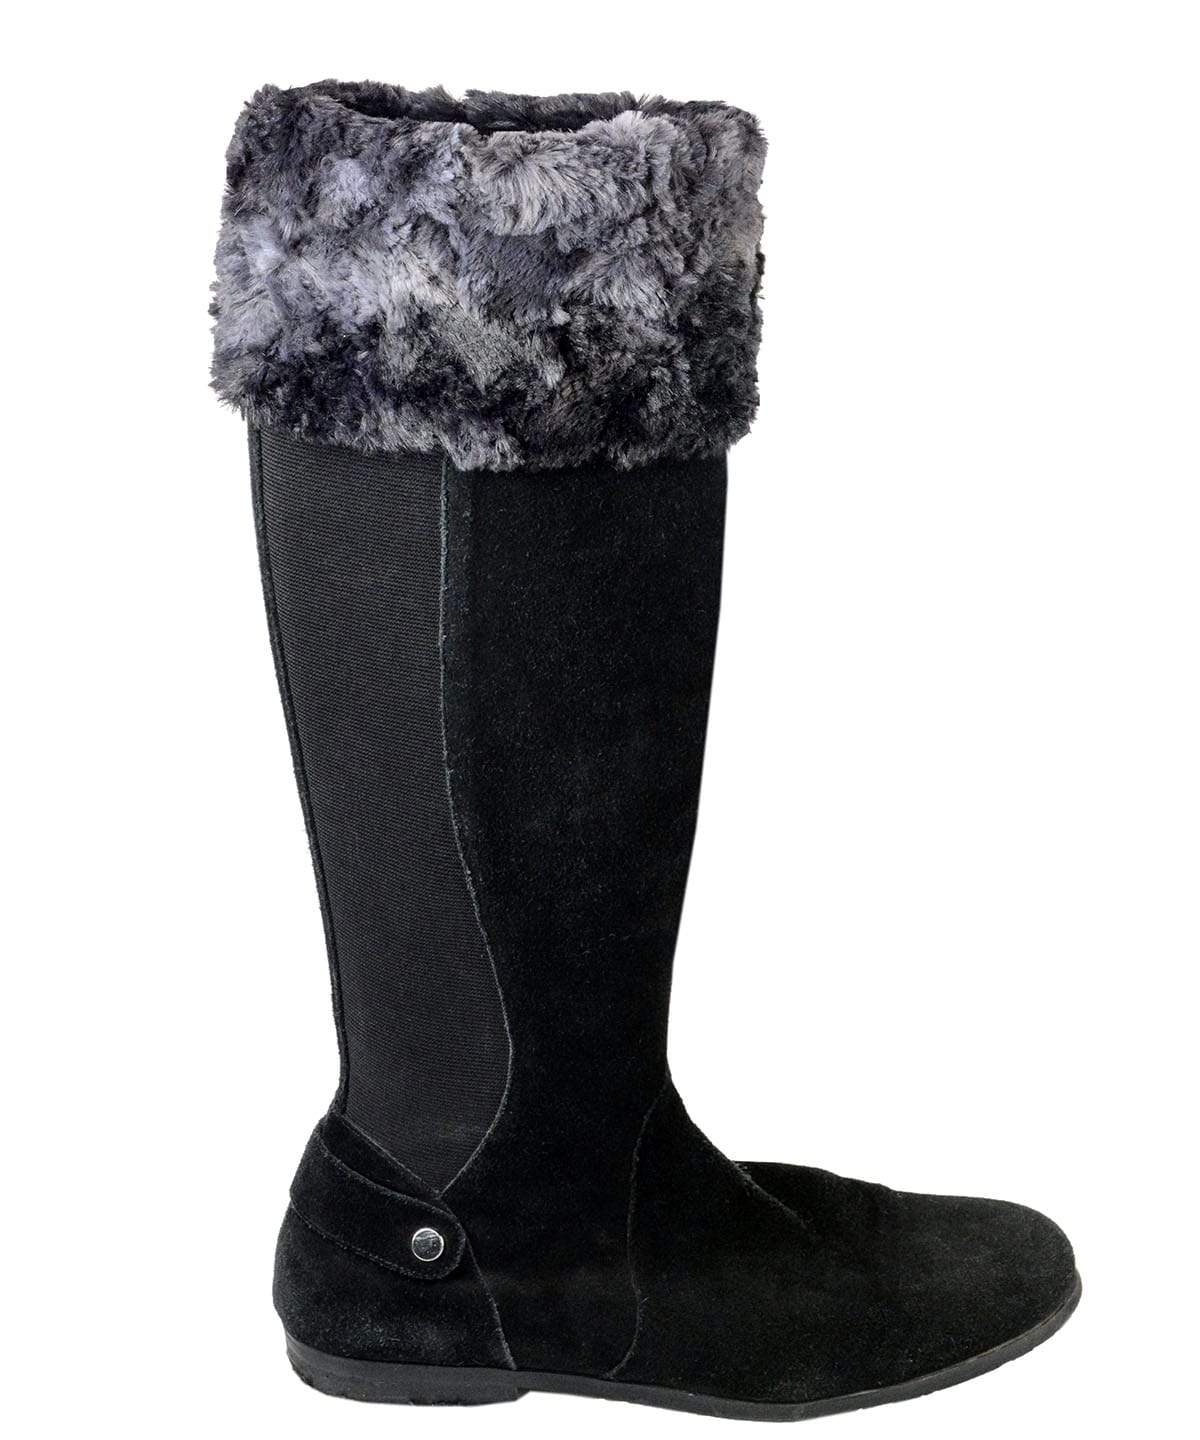 Boot Topper - Luxury Faux Fur in Highland (SOLD OUT)